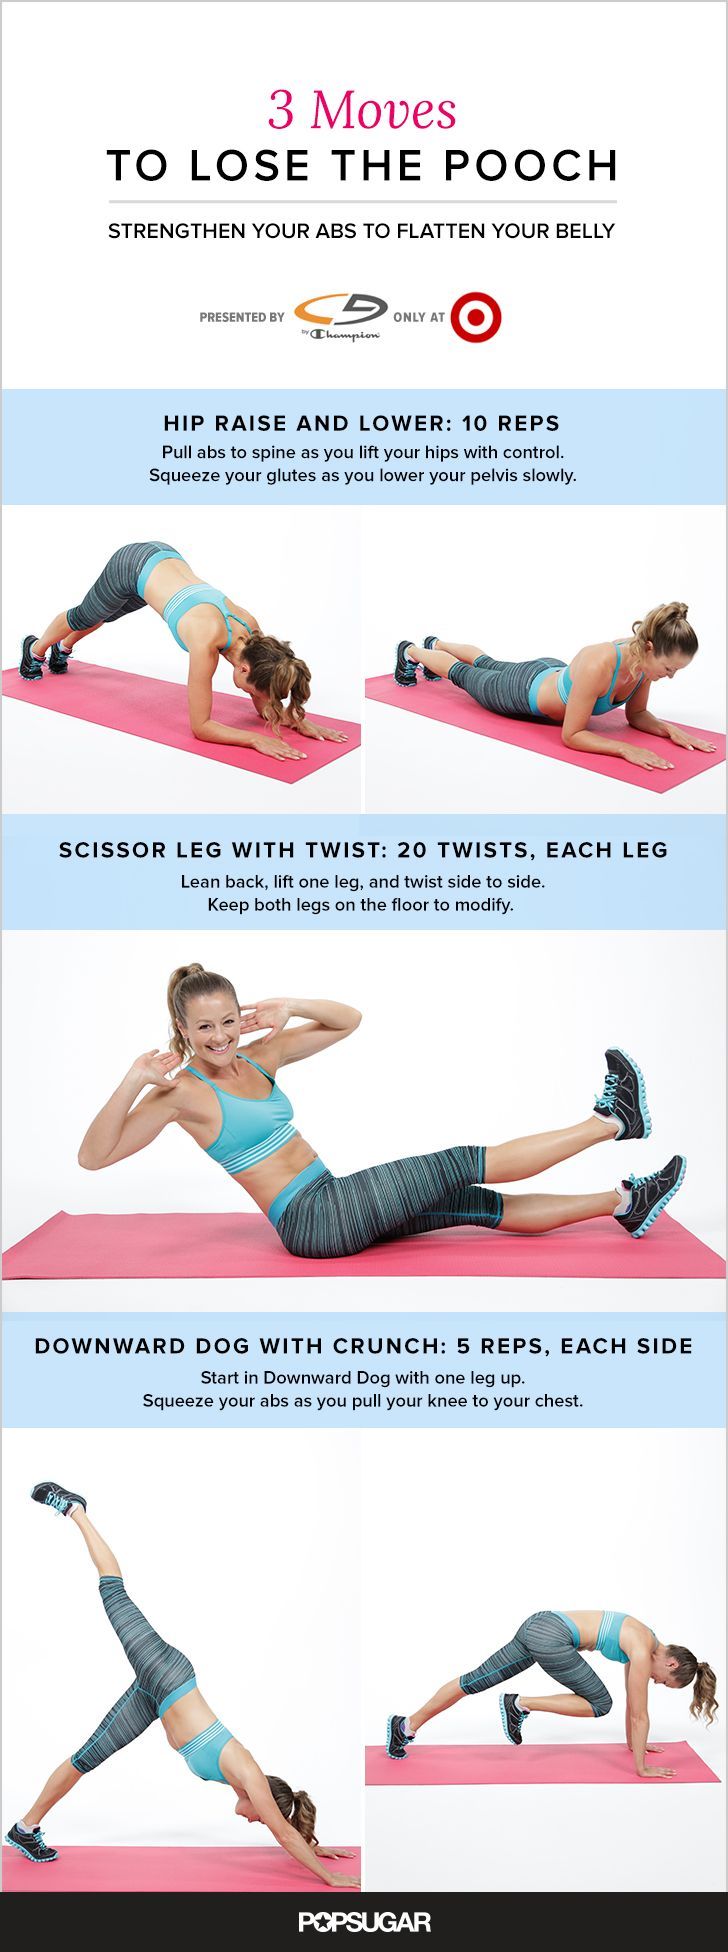 Get rid of the pooch and tighten up your lower abs with this quick workout. You will focus on the abs for five minutes and we